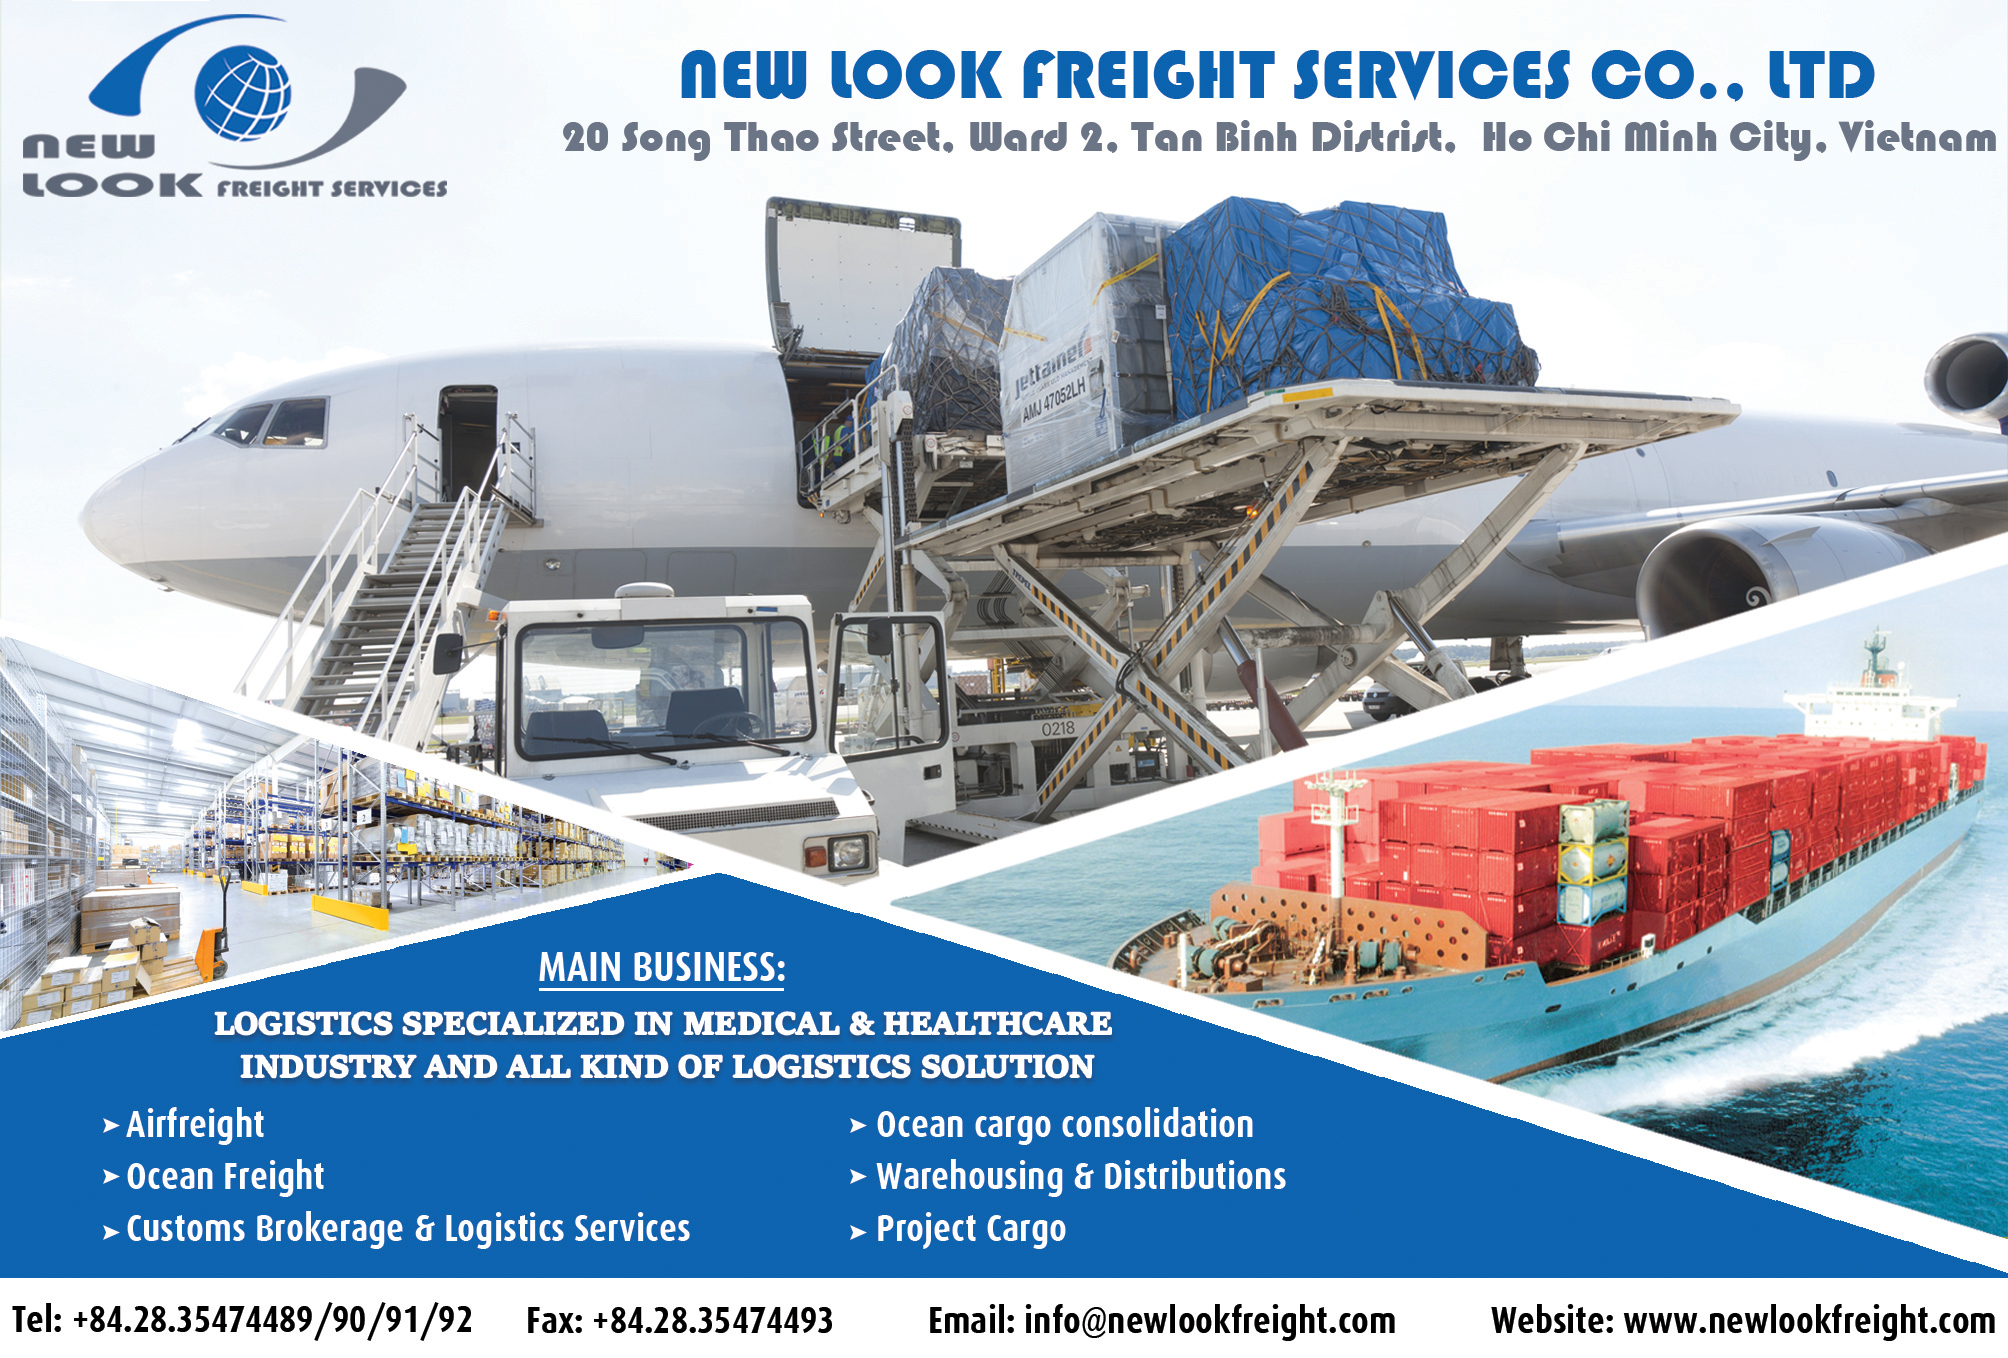 NEW LOOK FREIGHT SERVICES CO., LTD